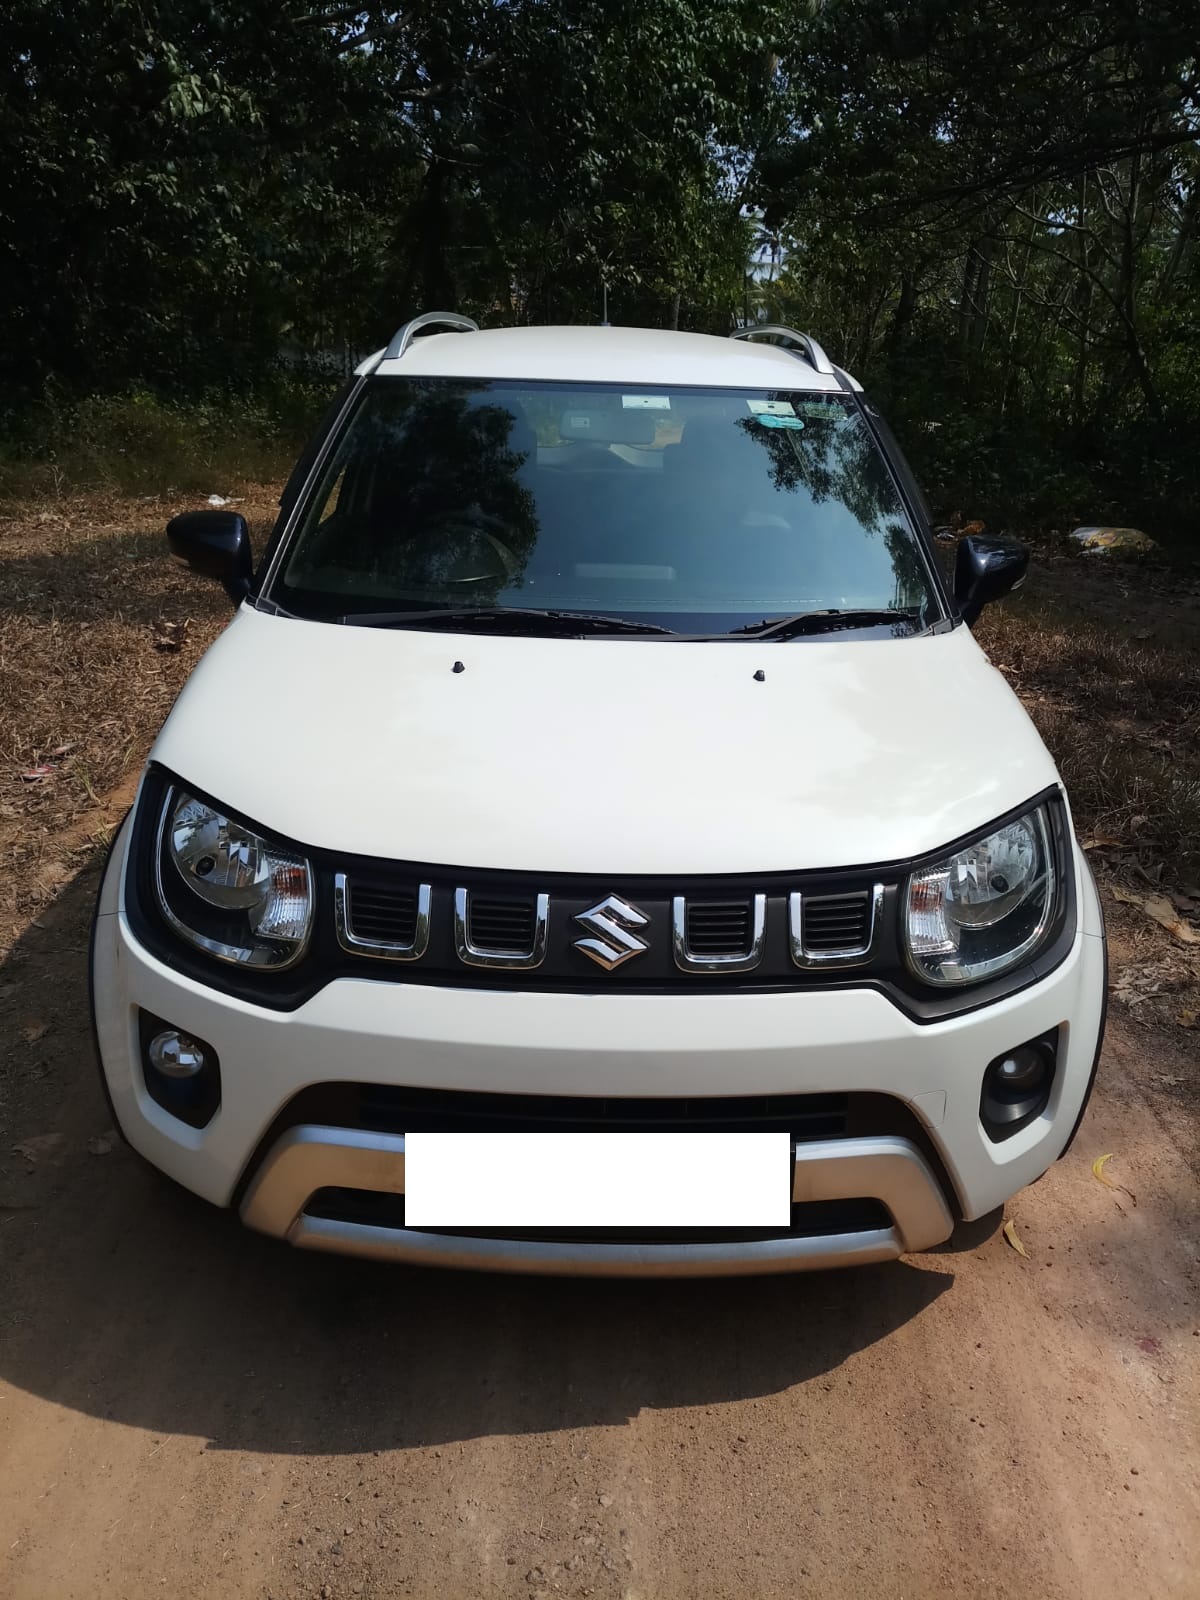 MARUTI IGNIS 2021 Second-hand Car for Sale in Kollam